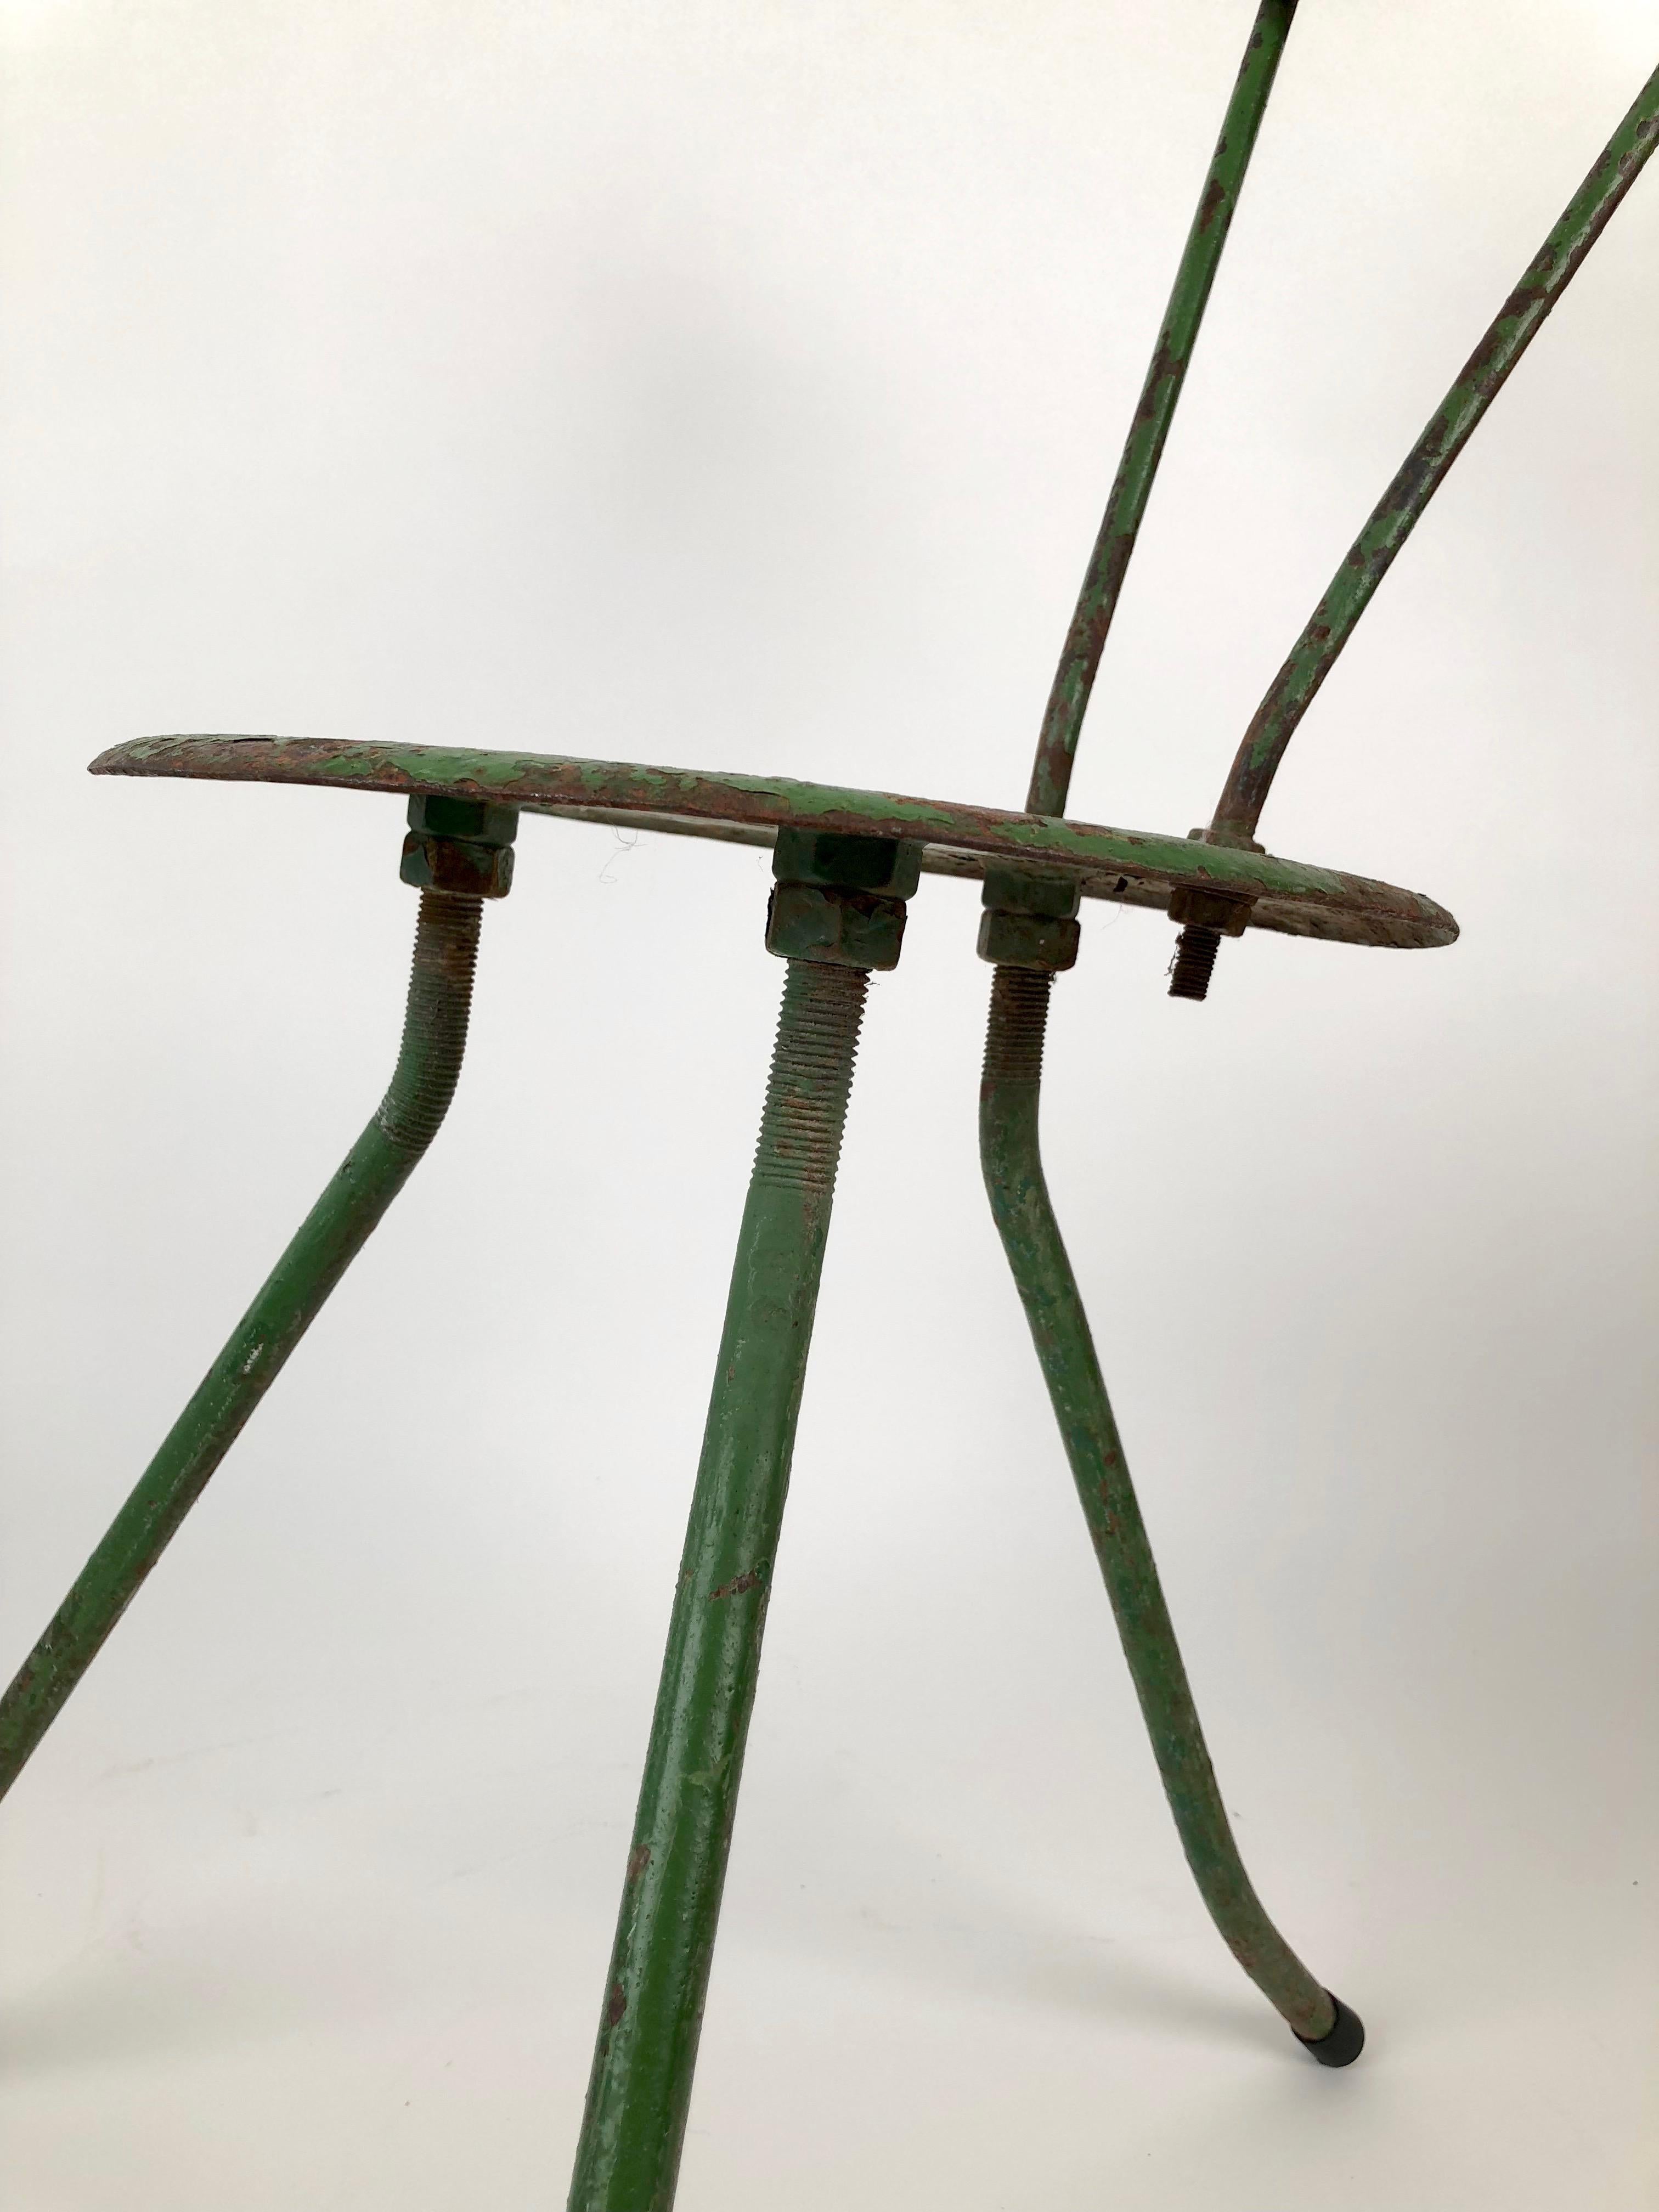 Mid-20th Century Pair of Handmade Metal Chairs, 1950s, from the Balaton Lake Region, Hungary For Sale